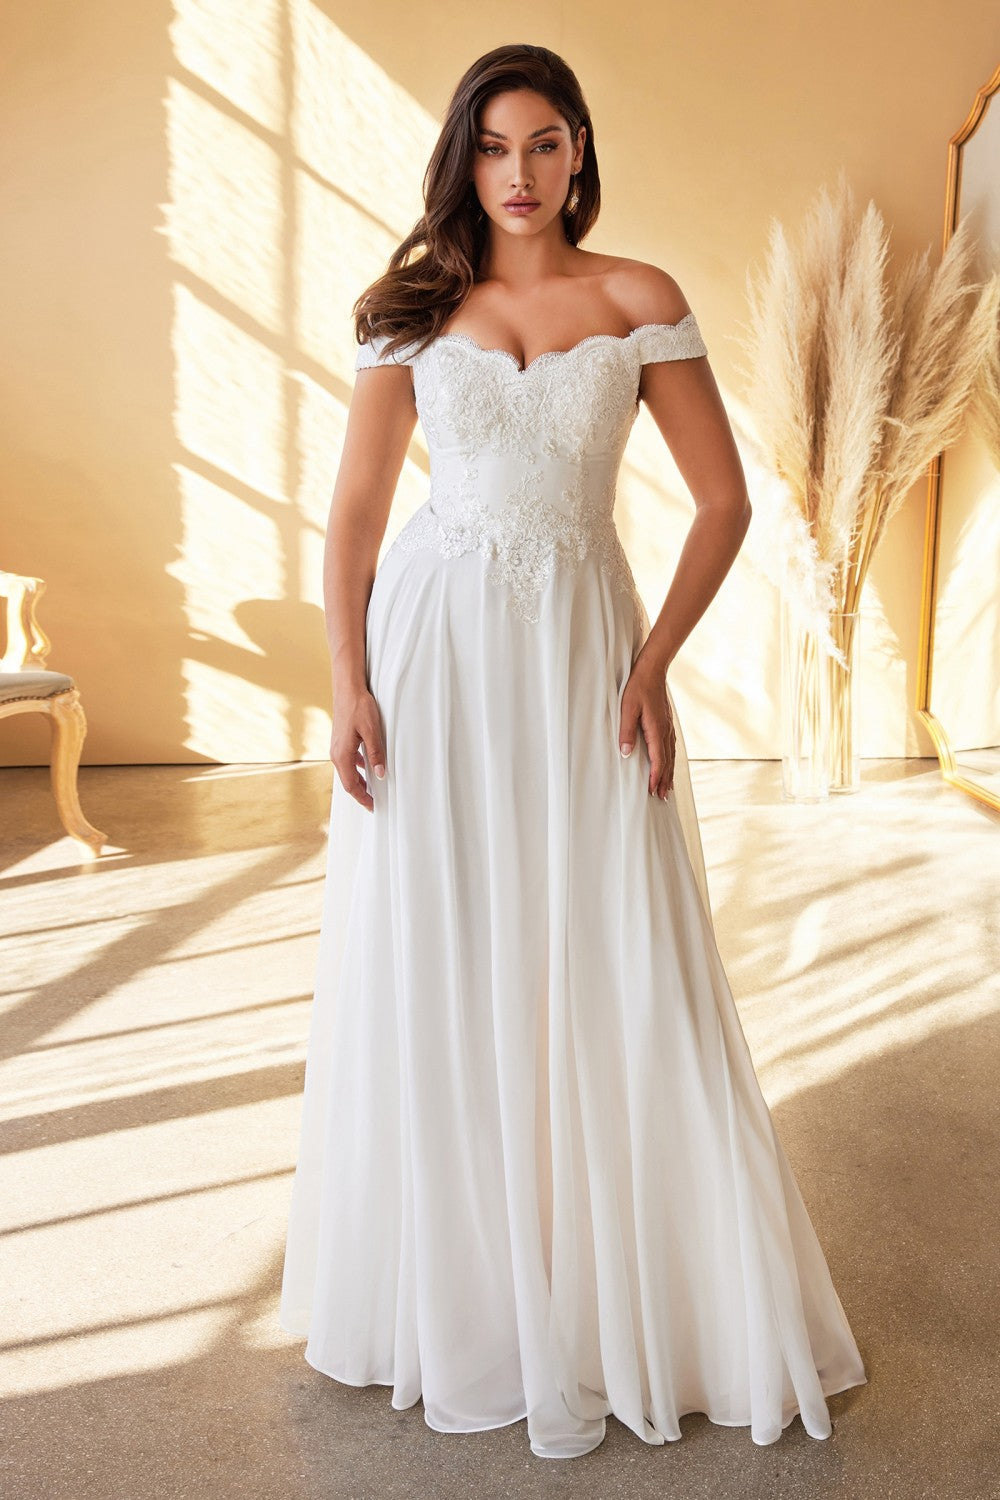 Off Shoulder Bridal Gown Modern Bride Floral Bodice Appliqued Embroidered Top with Cap Sleeves A-line Wedding Dress CD7258W Sale-0